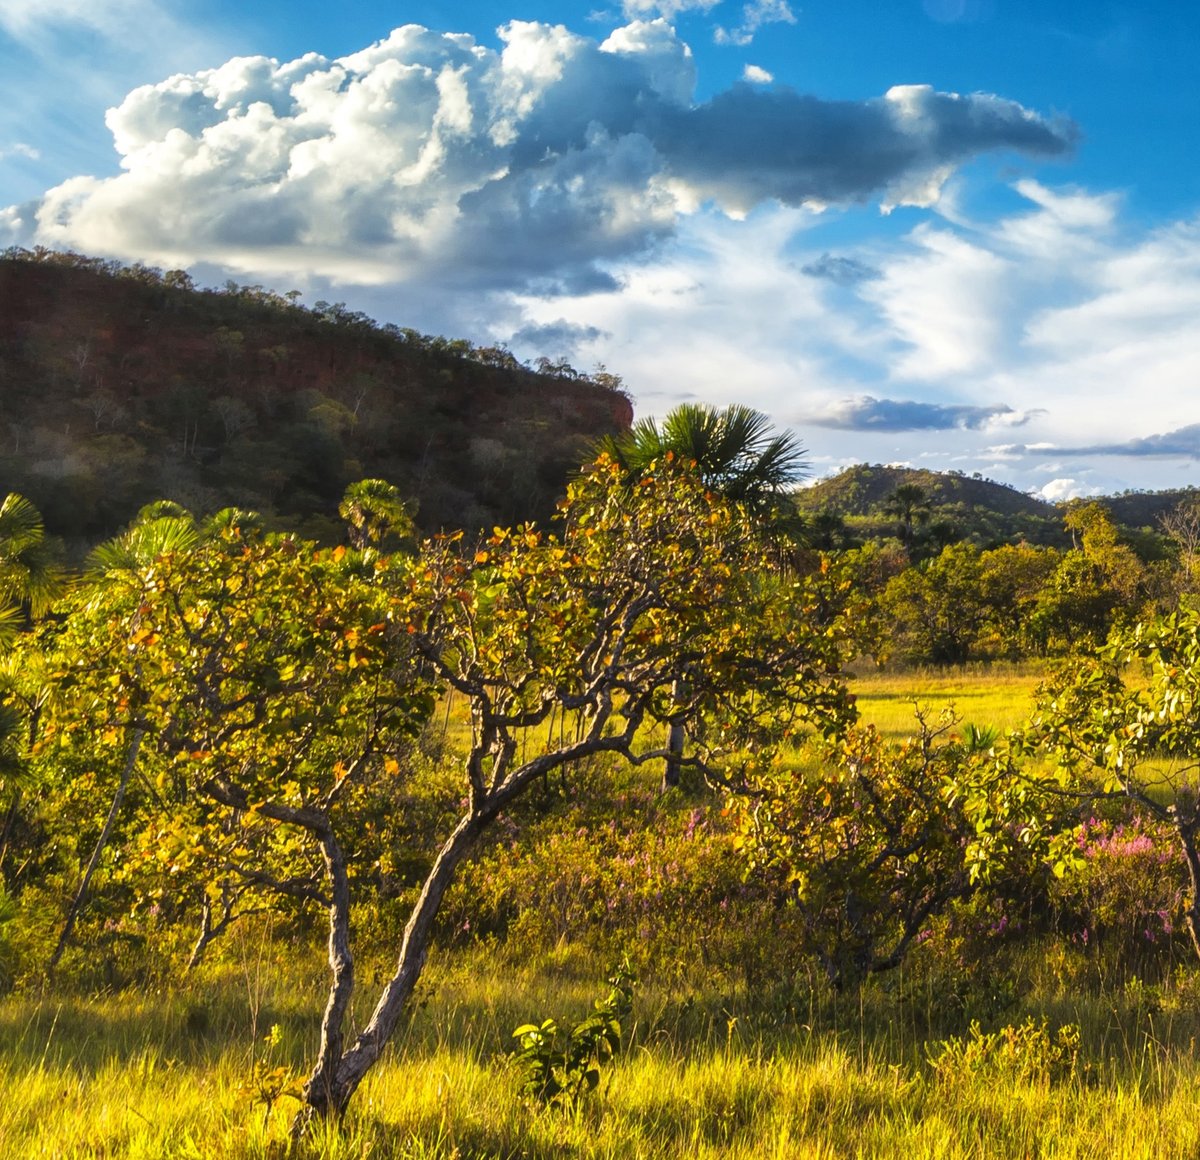 Last year, deforestation surged in Brazil’s Cerrado region by nearly 45% compared to 2022. Our Cerrado Biome project aims to protect native forests and grasslands. Learn more about the Cerrado Biome project or support it by purchasing #carboncredits: carbonstreaming.com/portfolio/buy-…